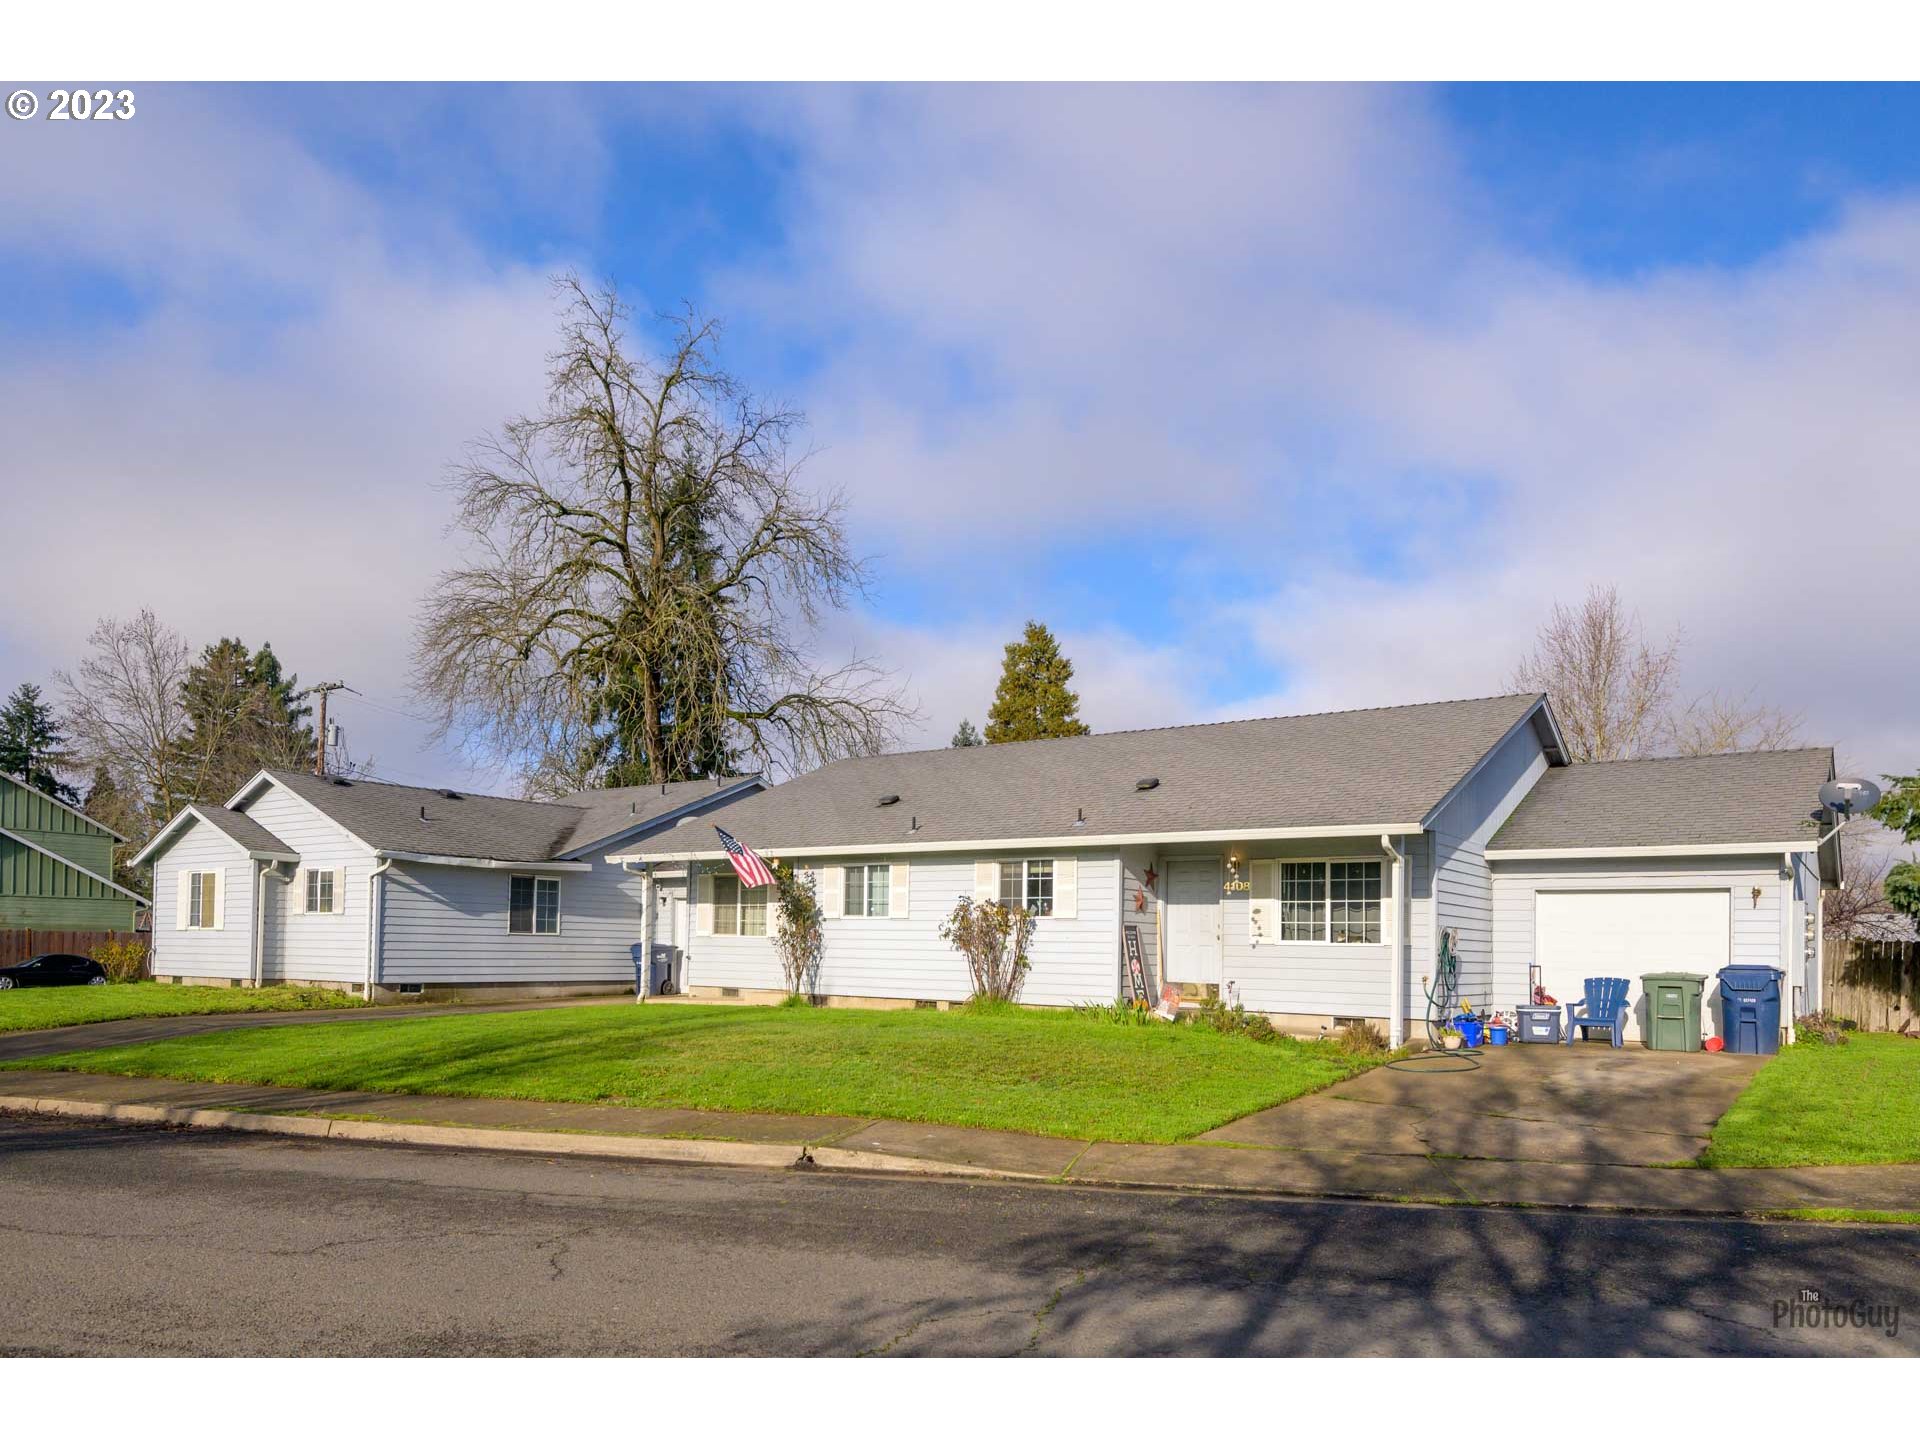 499 S 41ST ST, Springfield, OR 